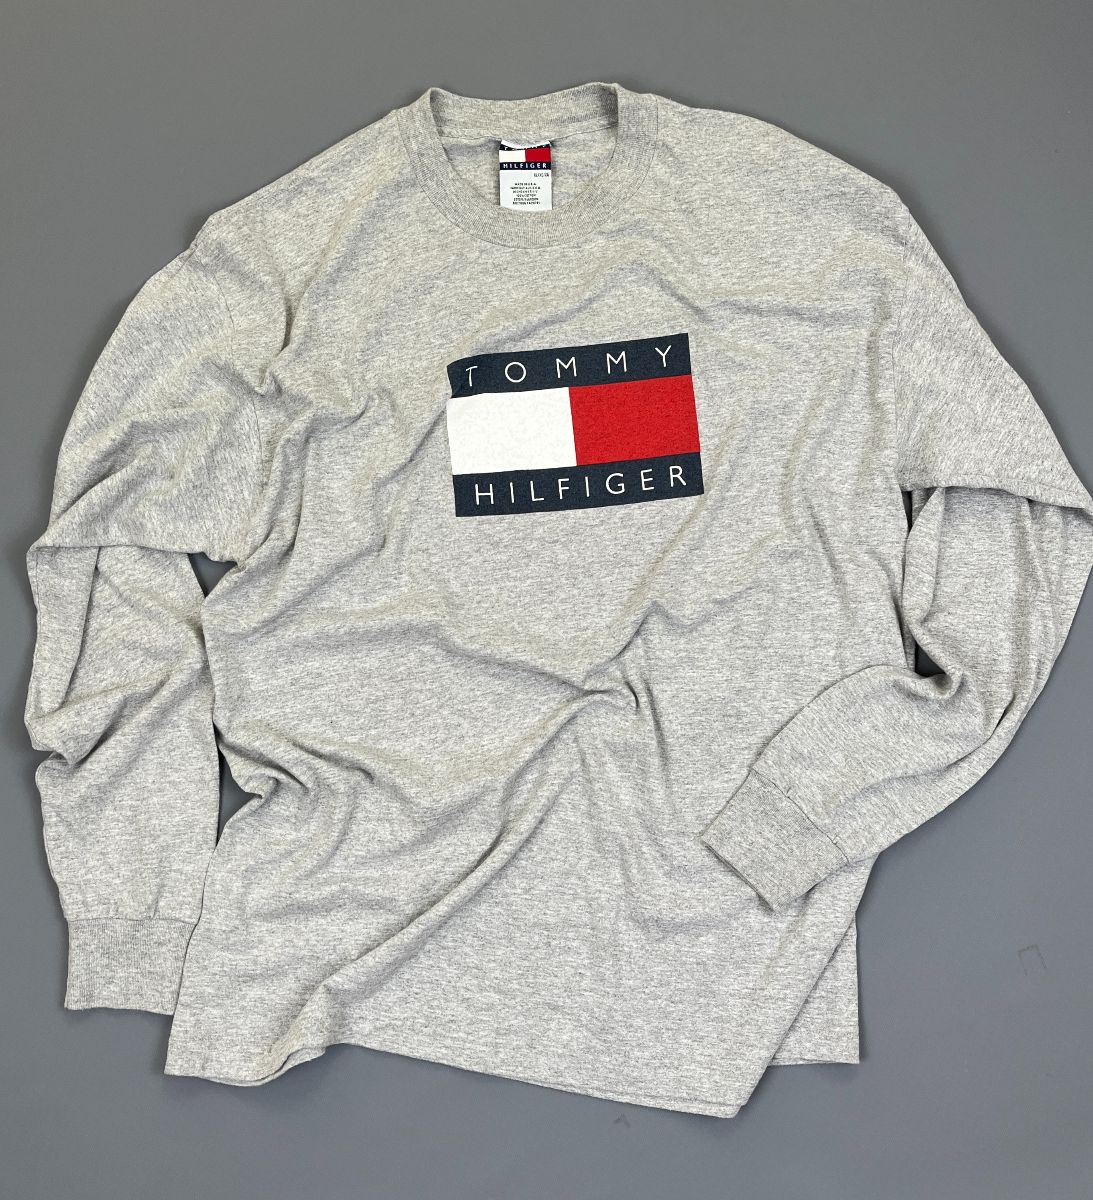 product details: CLASSIC 1990S TOMMY HILFIGER LONG SLEEVE PULLOVER T-SHIRT MADE IN USA photo